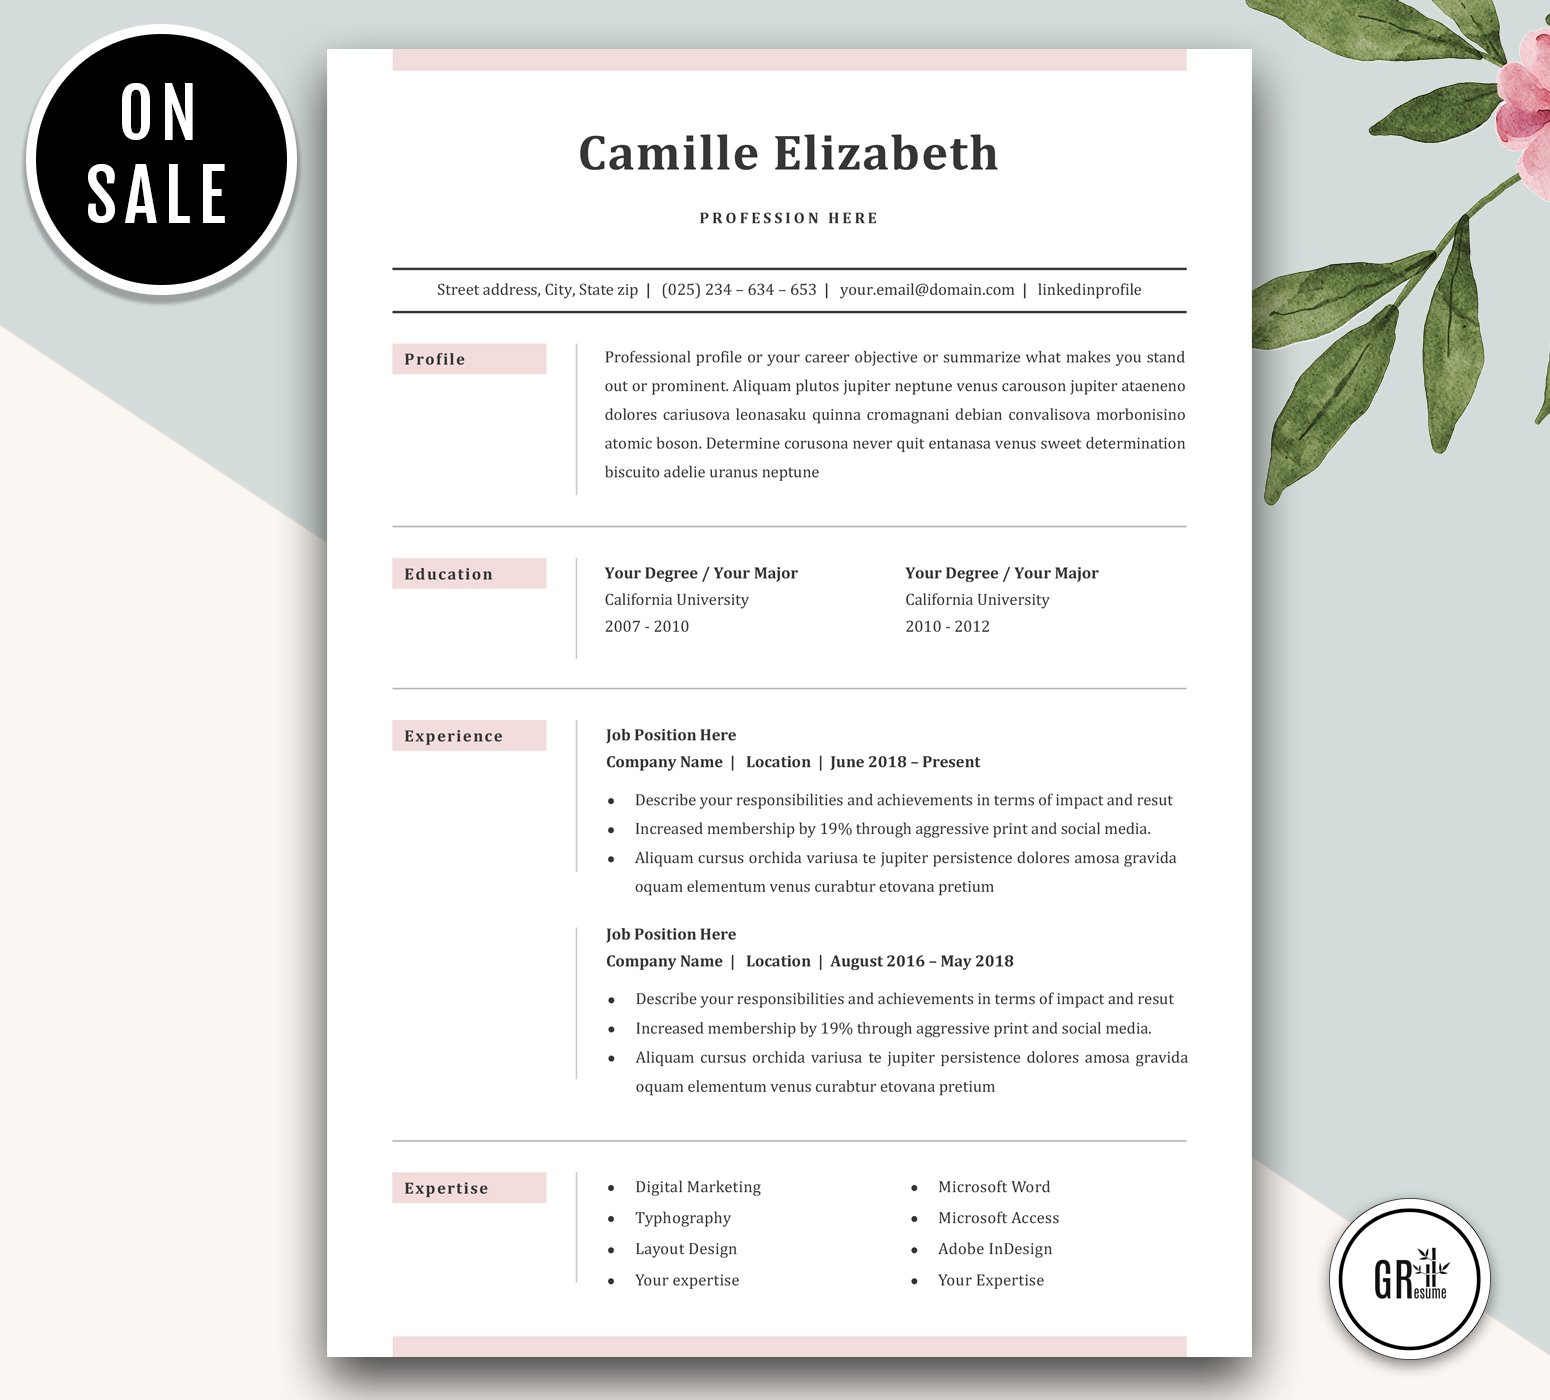 Resume CV Template for Word cover image.